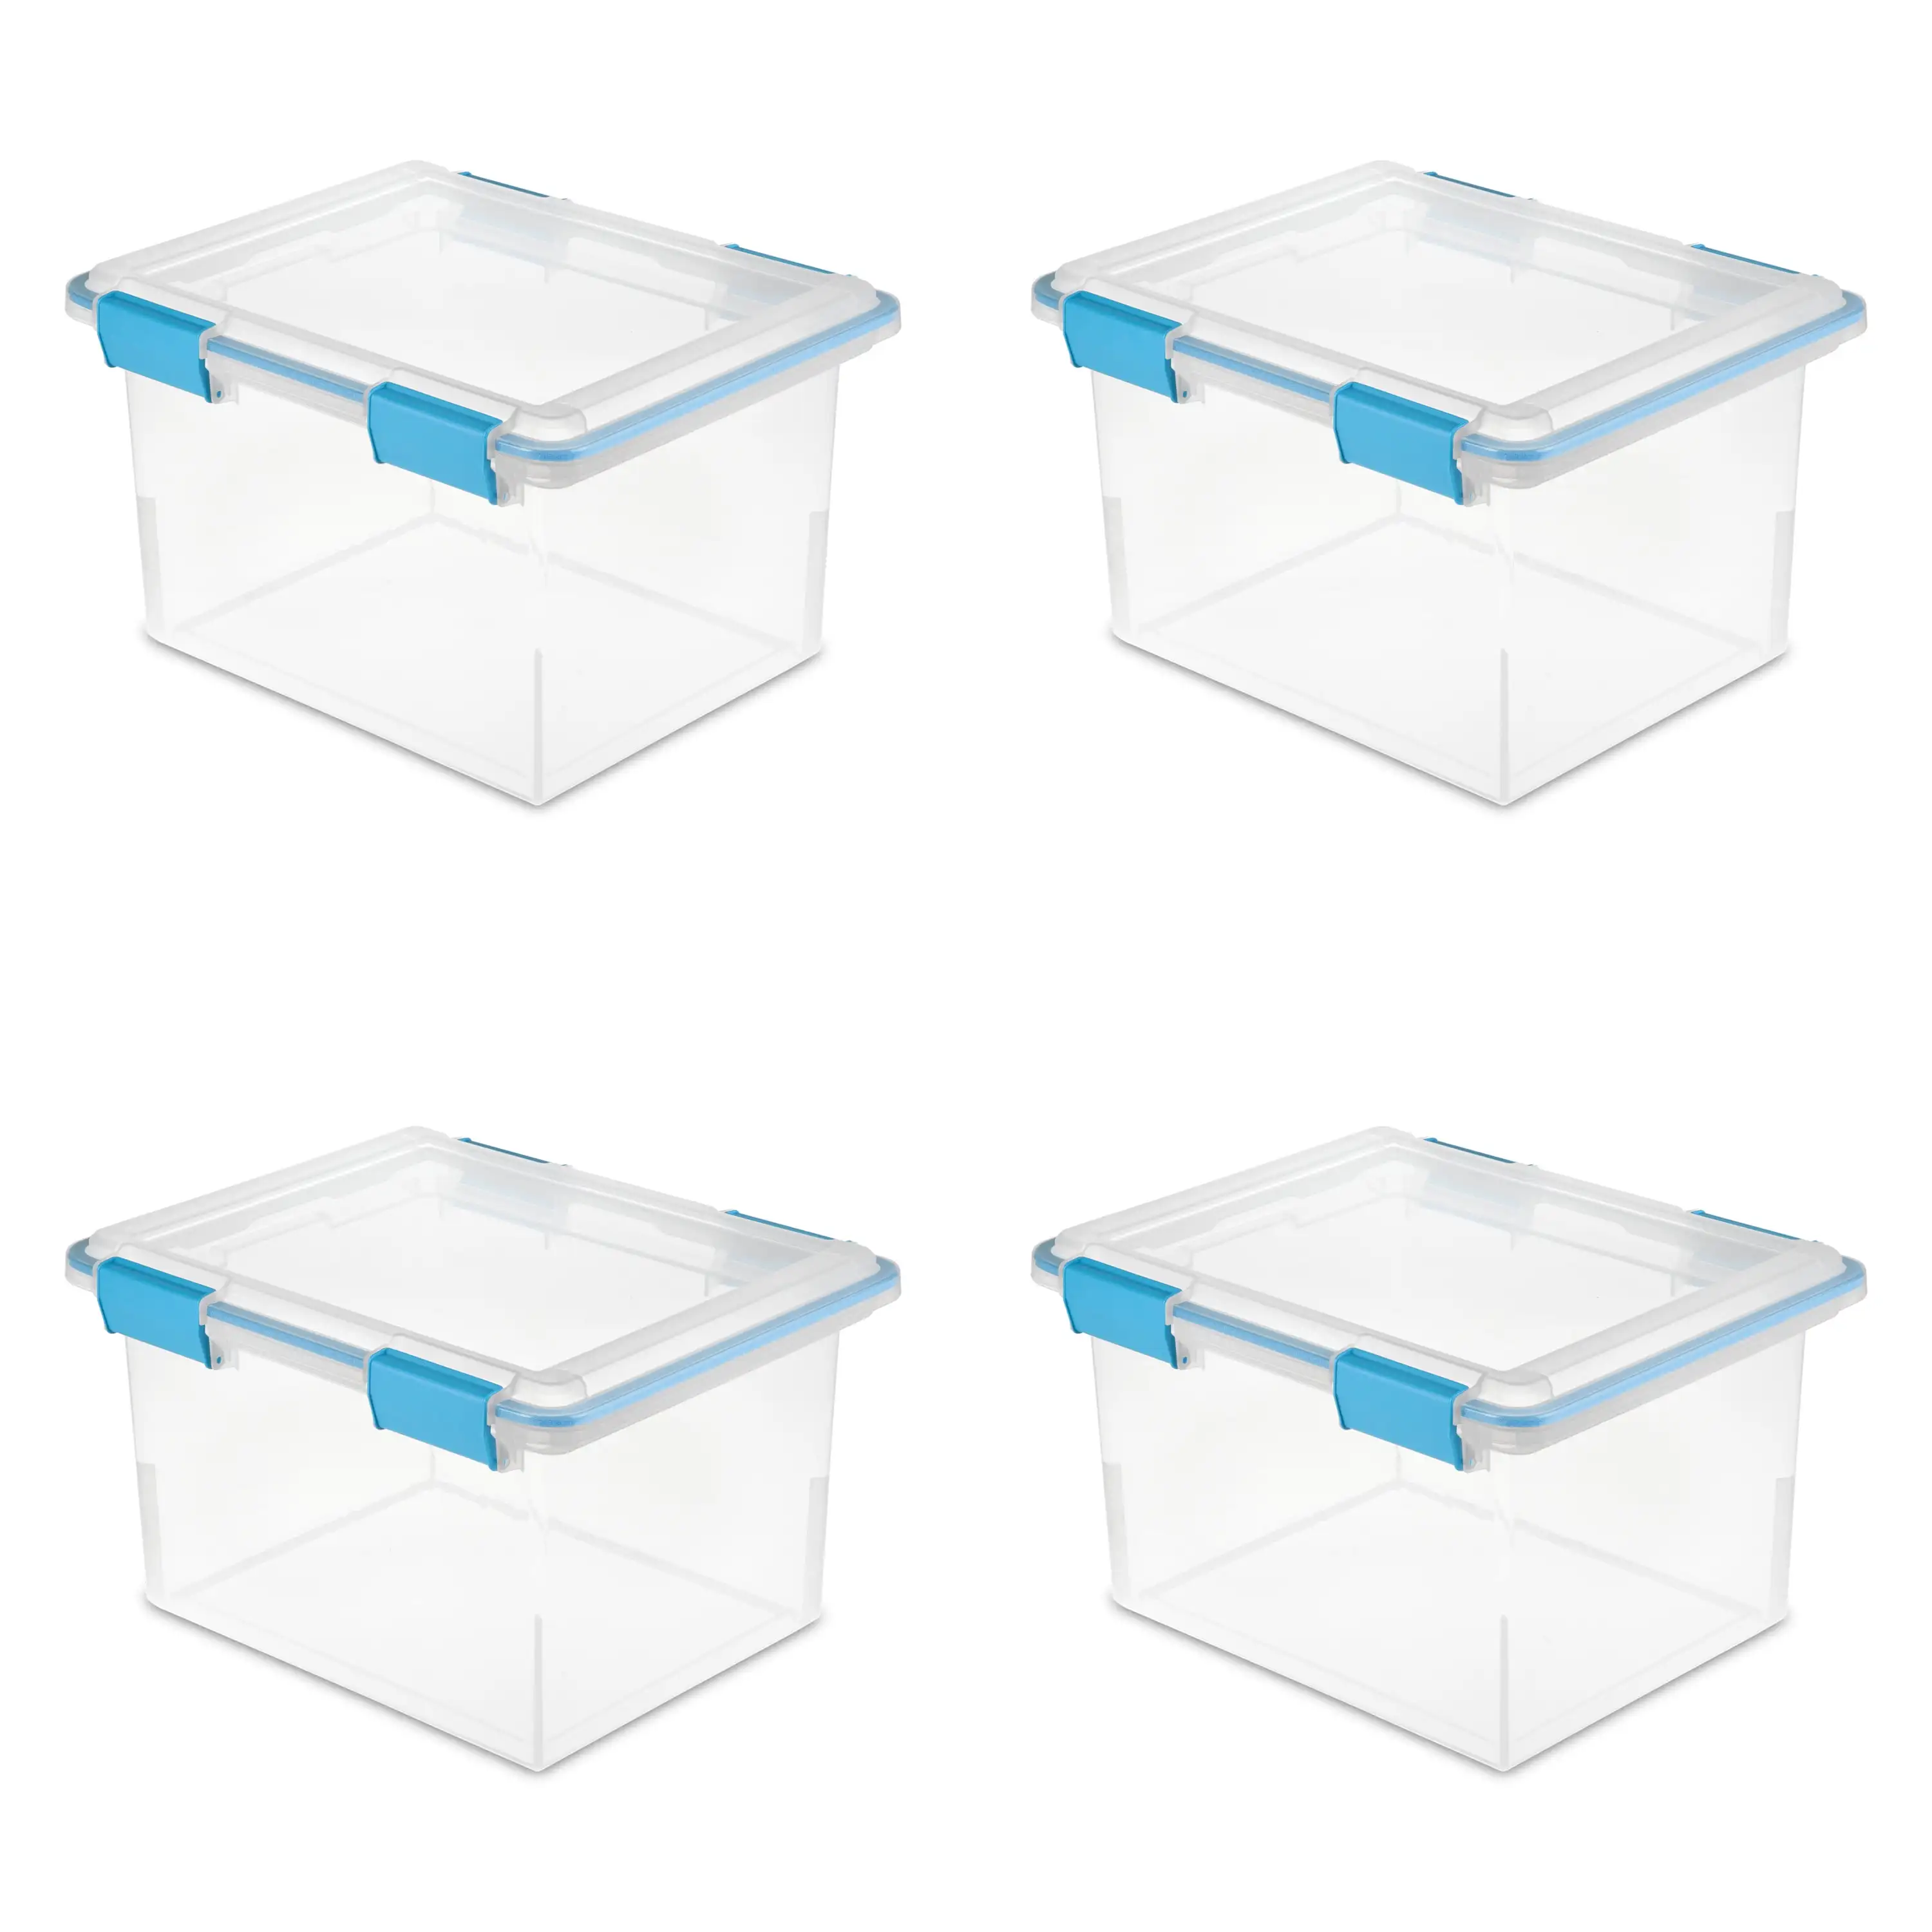 

32 Qt Gasket Box Clear Base and Lid Blue Aquarium Set of 4 storage containers